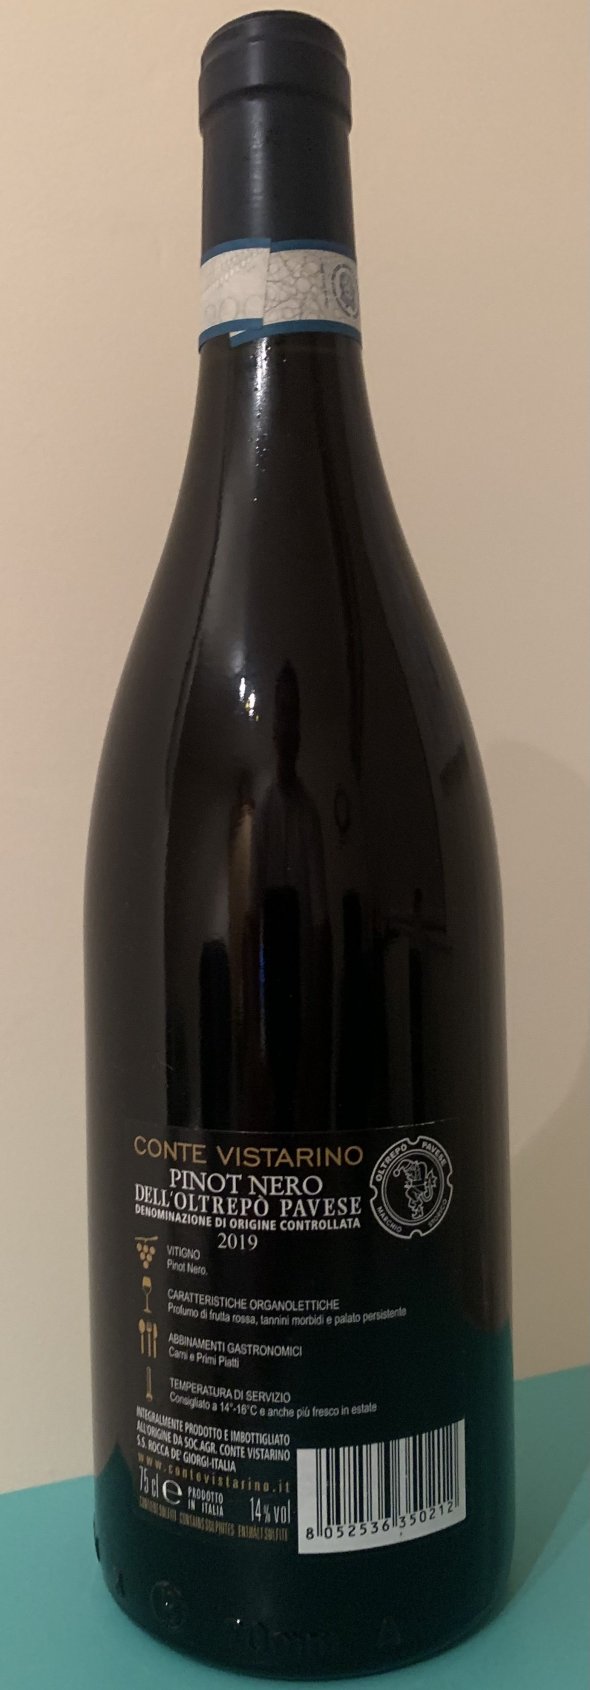 Pinot Nero - RED, Conte Vistarino Soft fruit Pinot noir , elegant with silky tannins .. Good balance on the palate - Not Oaked aged. Produced in the sub region of Lombardia. Vintage 2019 Very well priced - Great value for the quality and style.